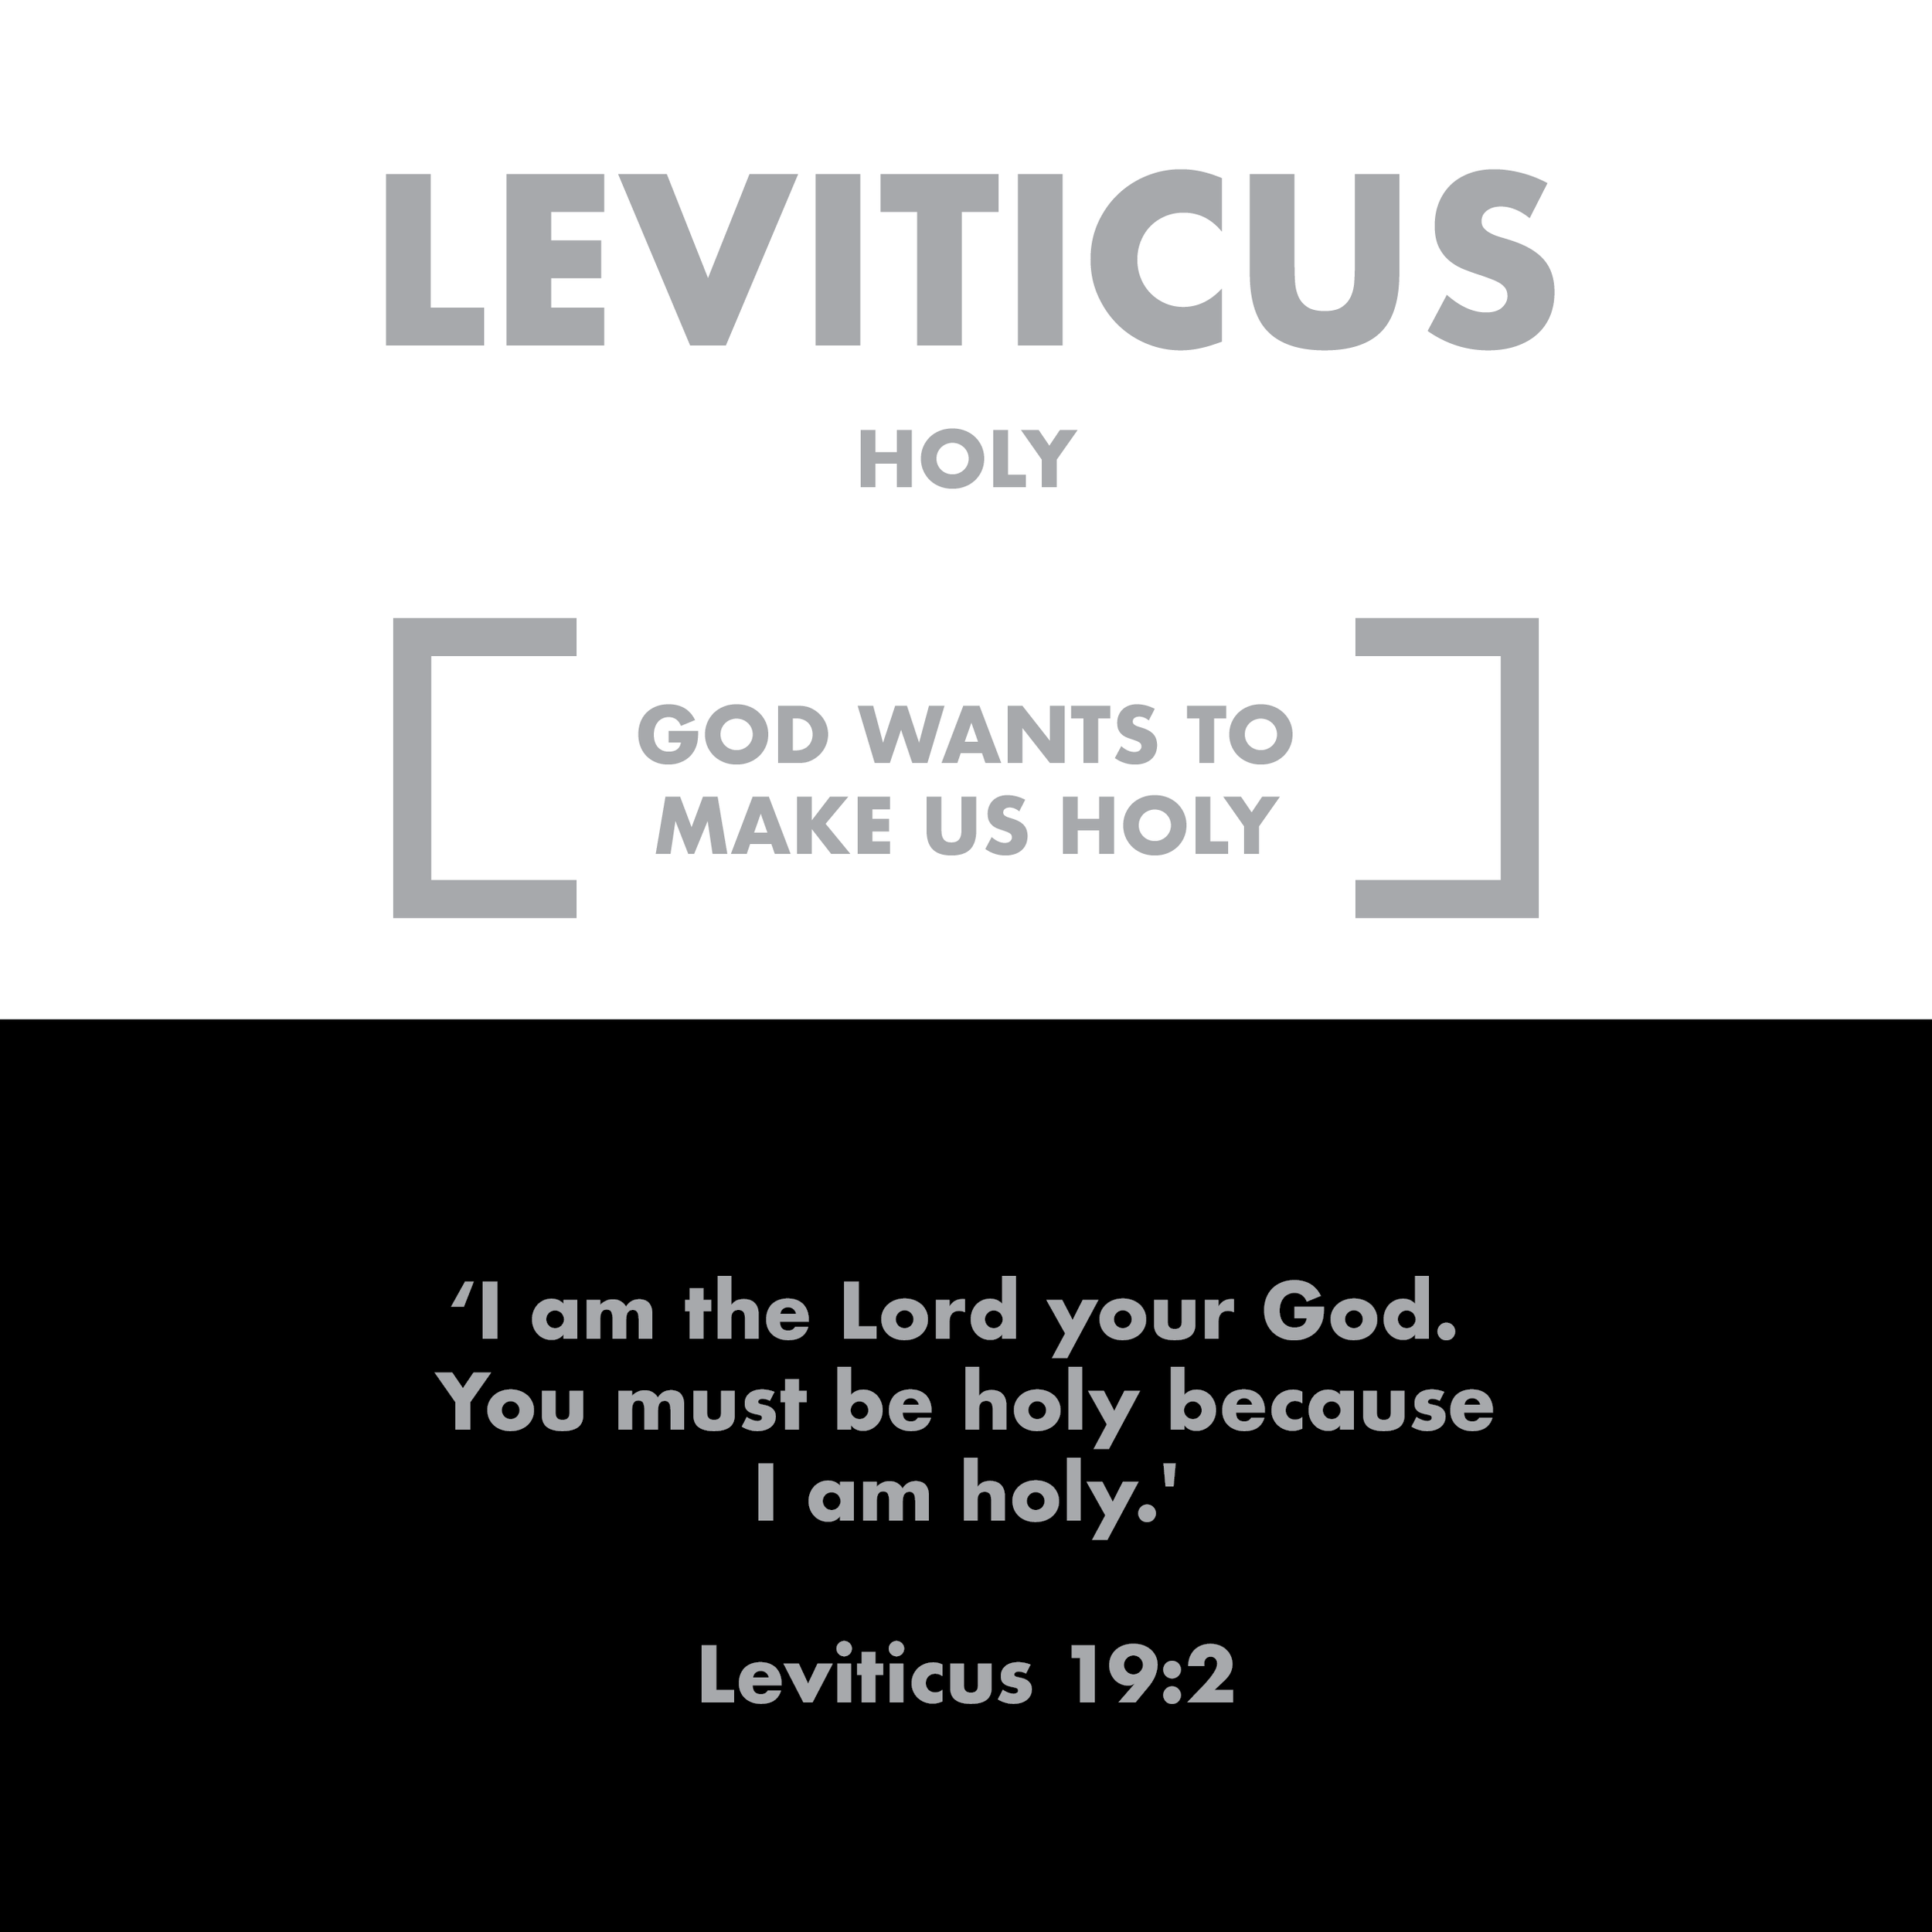 Books of the Bible_posters_03 Leviticus.png